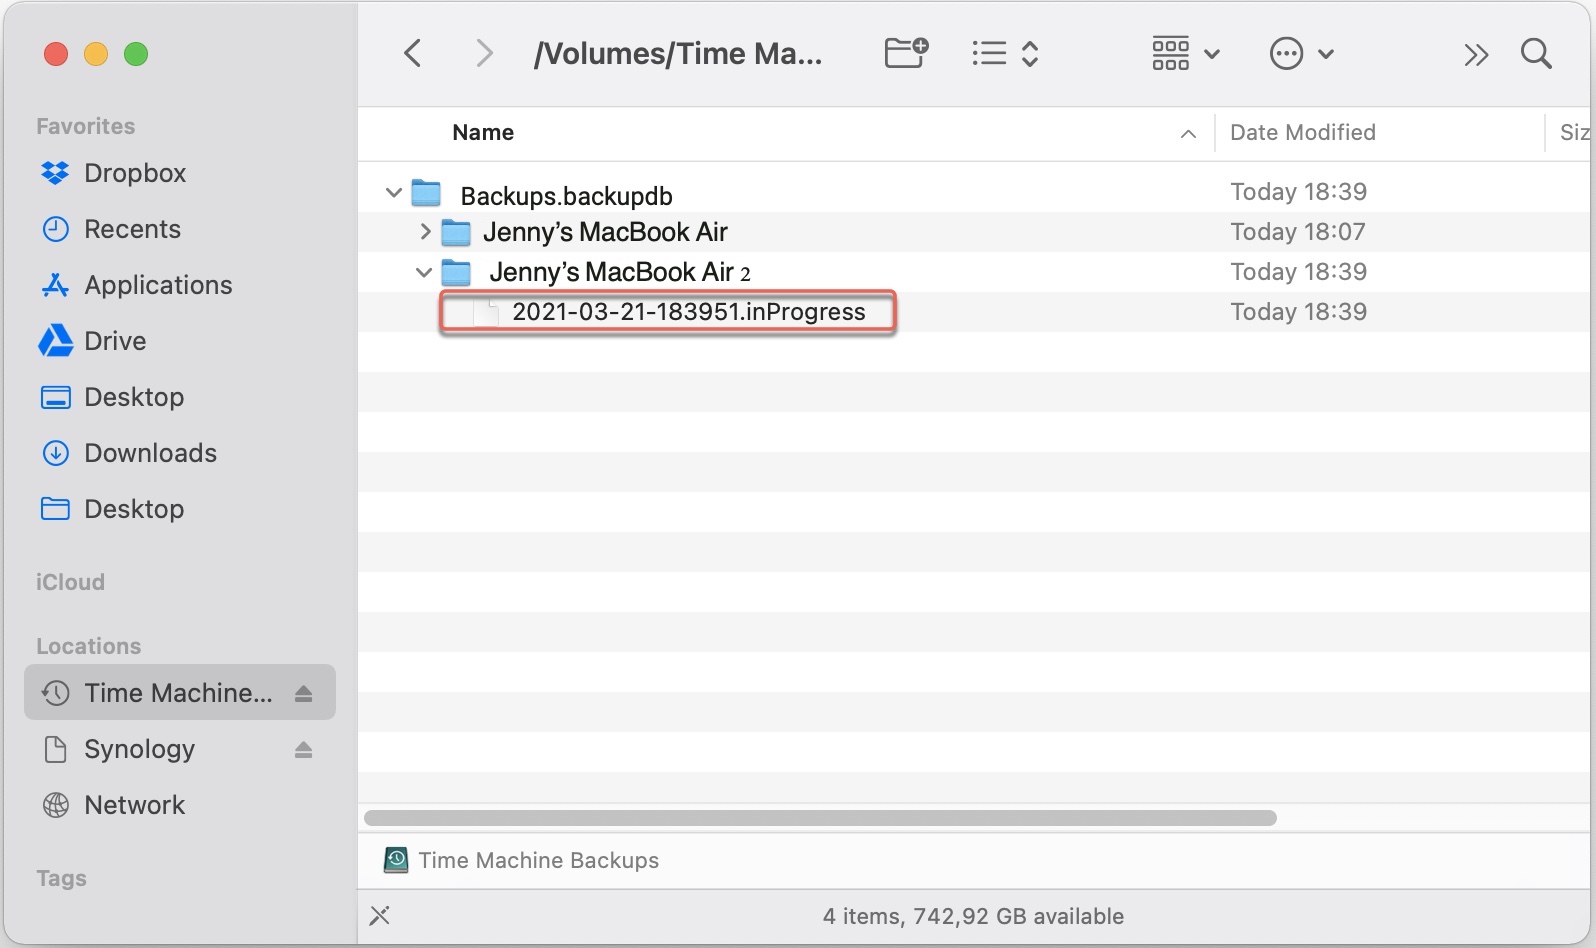 delete inProgress file created in the failed Time Machine backup